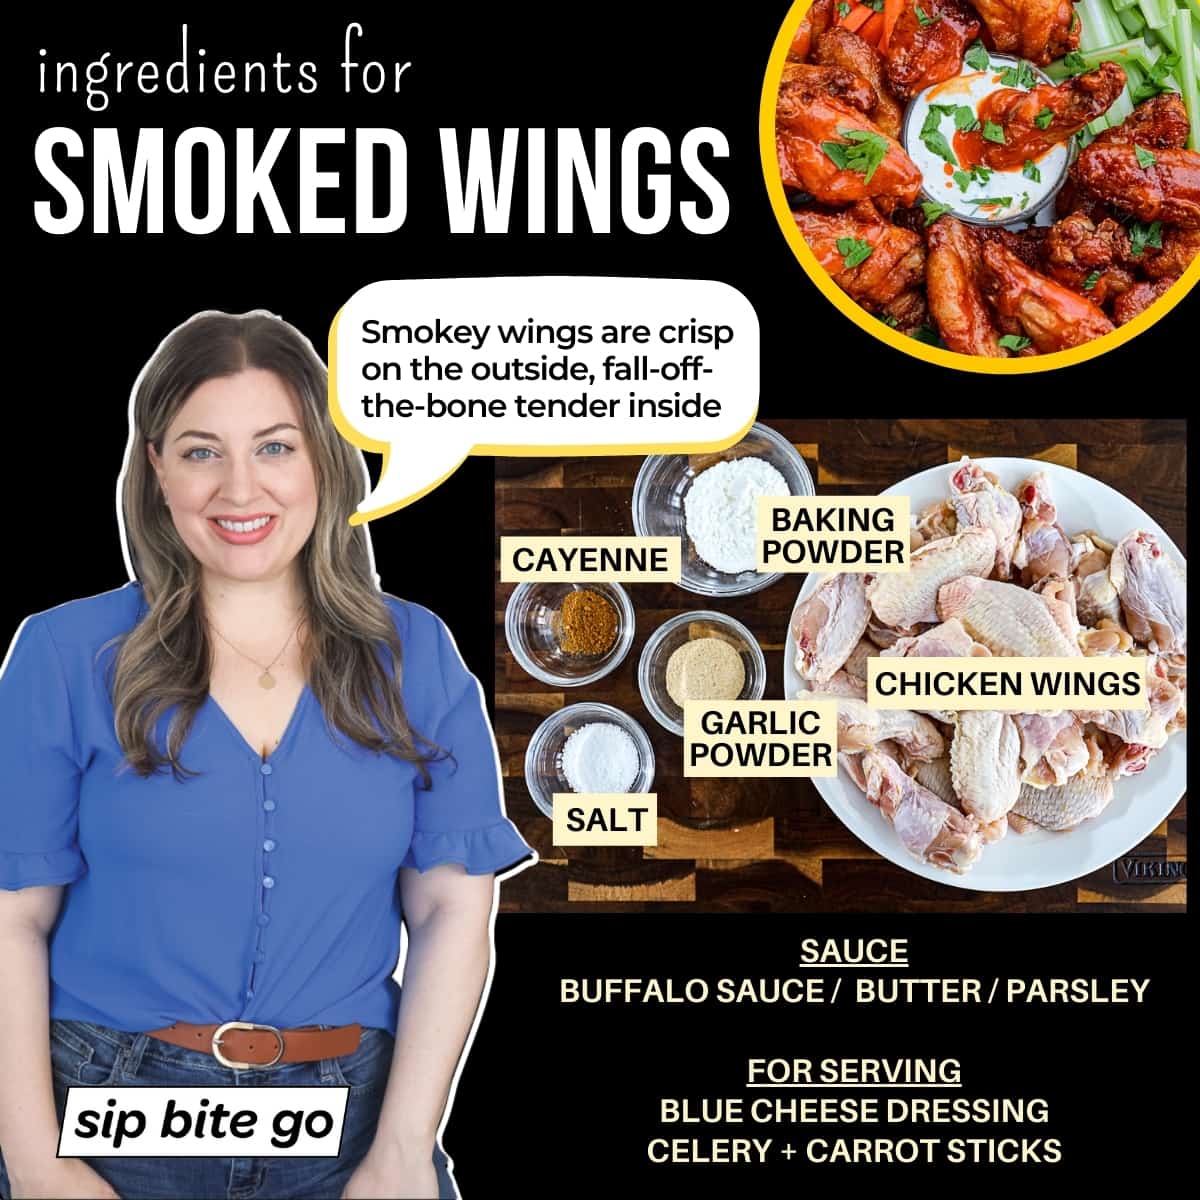 Graphic chart with ingredients for smoked wings recipe.